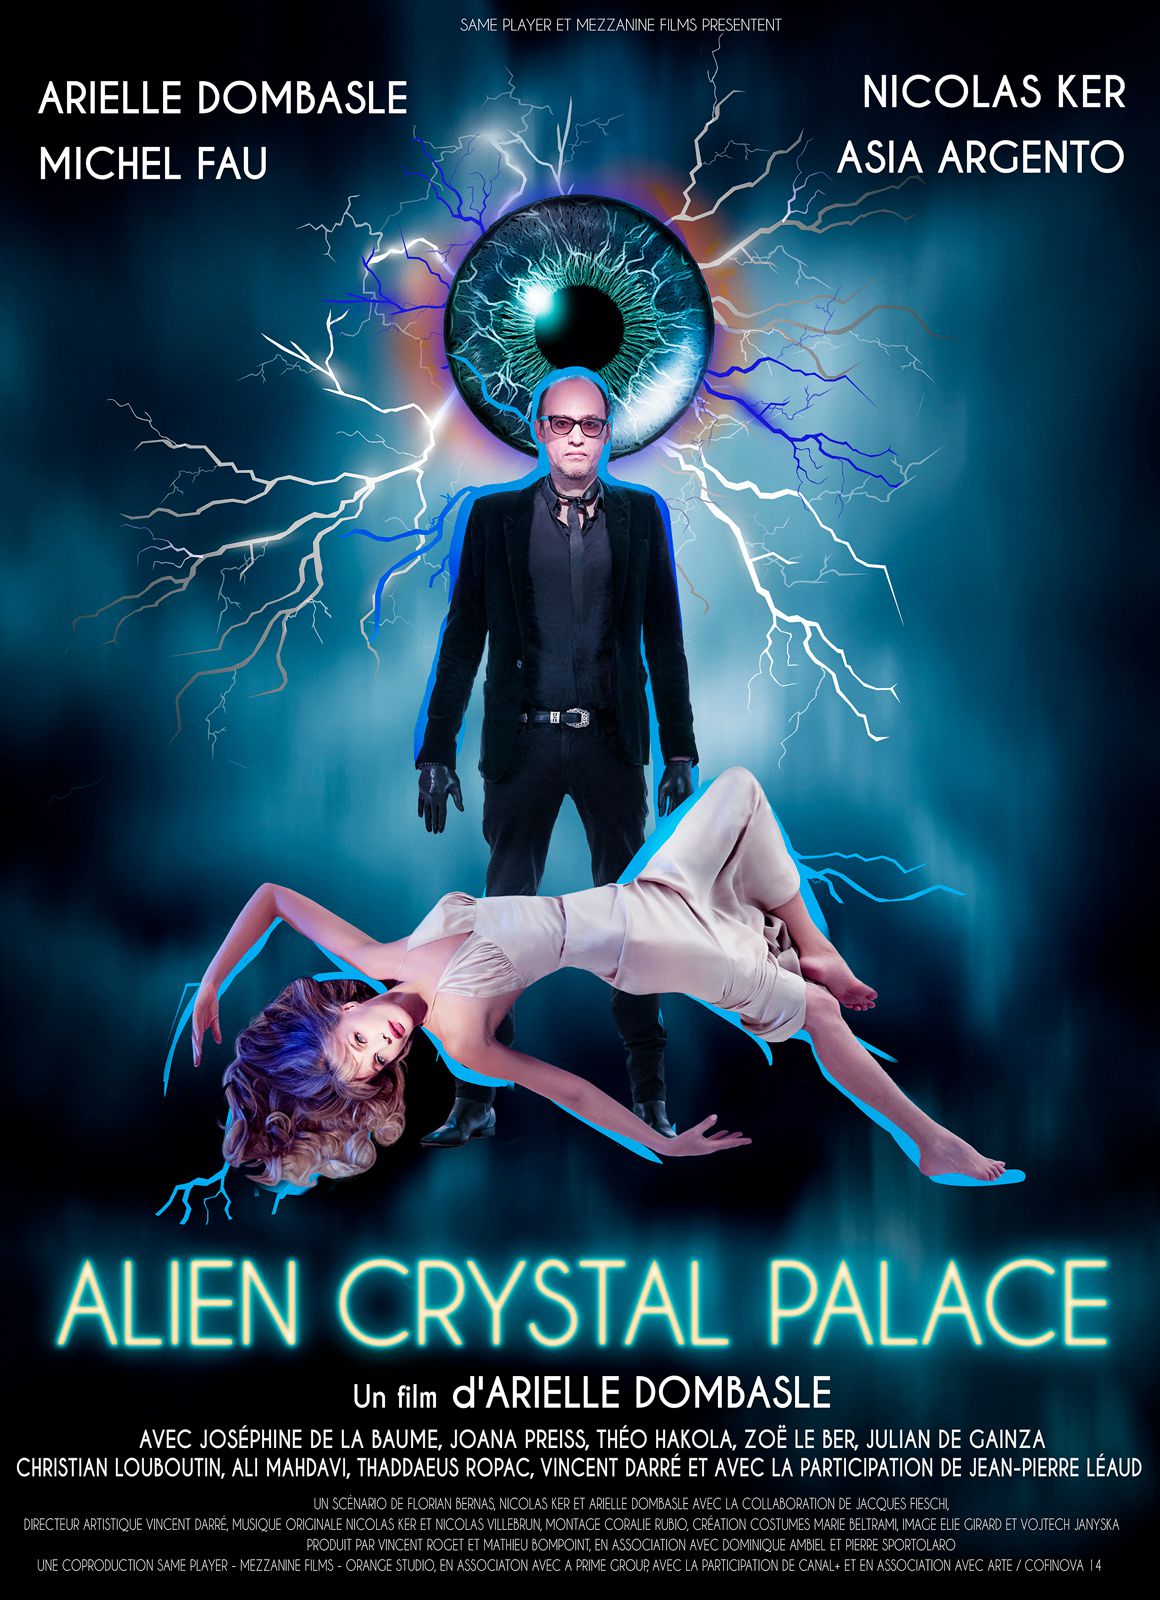 Alien Crystal Palace - Film (2019) streaming VF gratuit complet